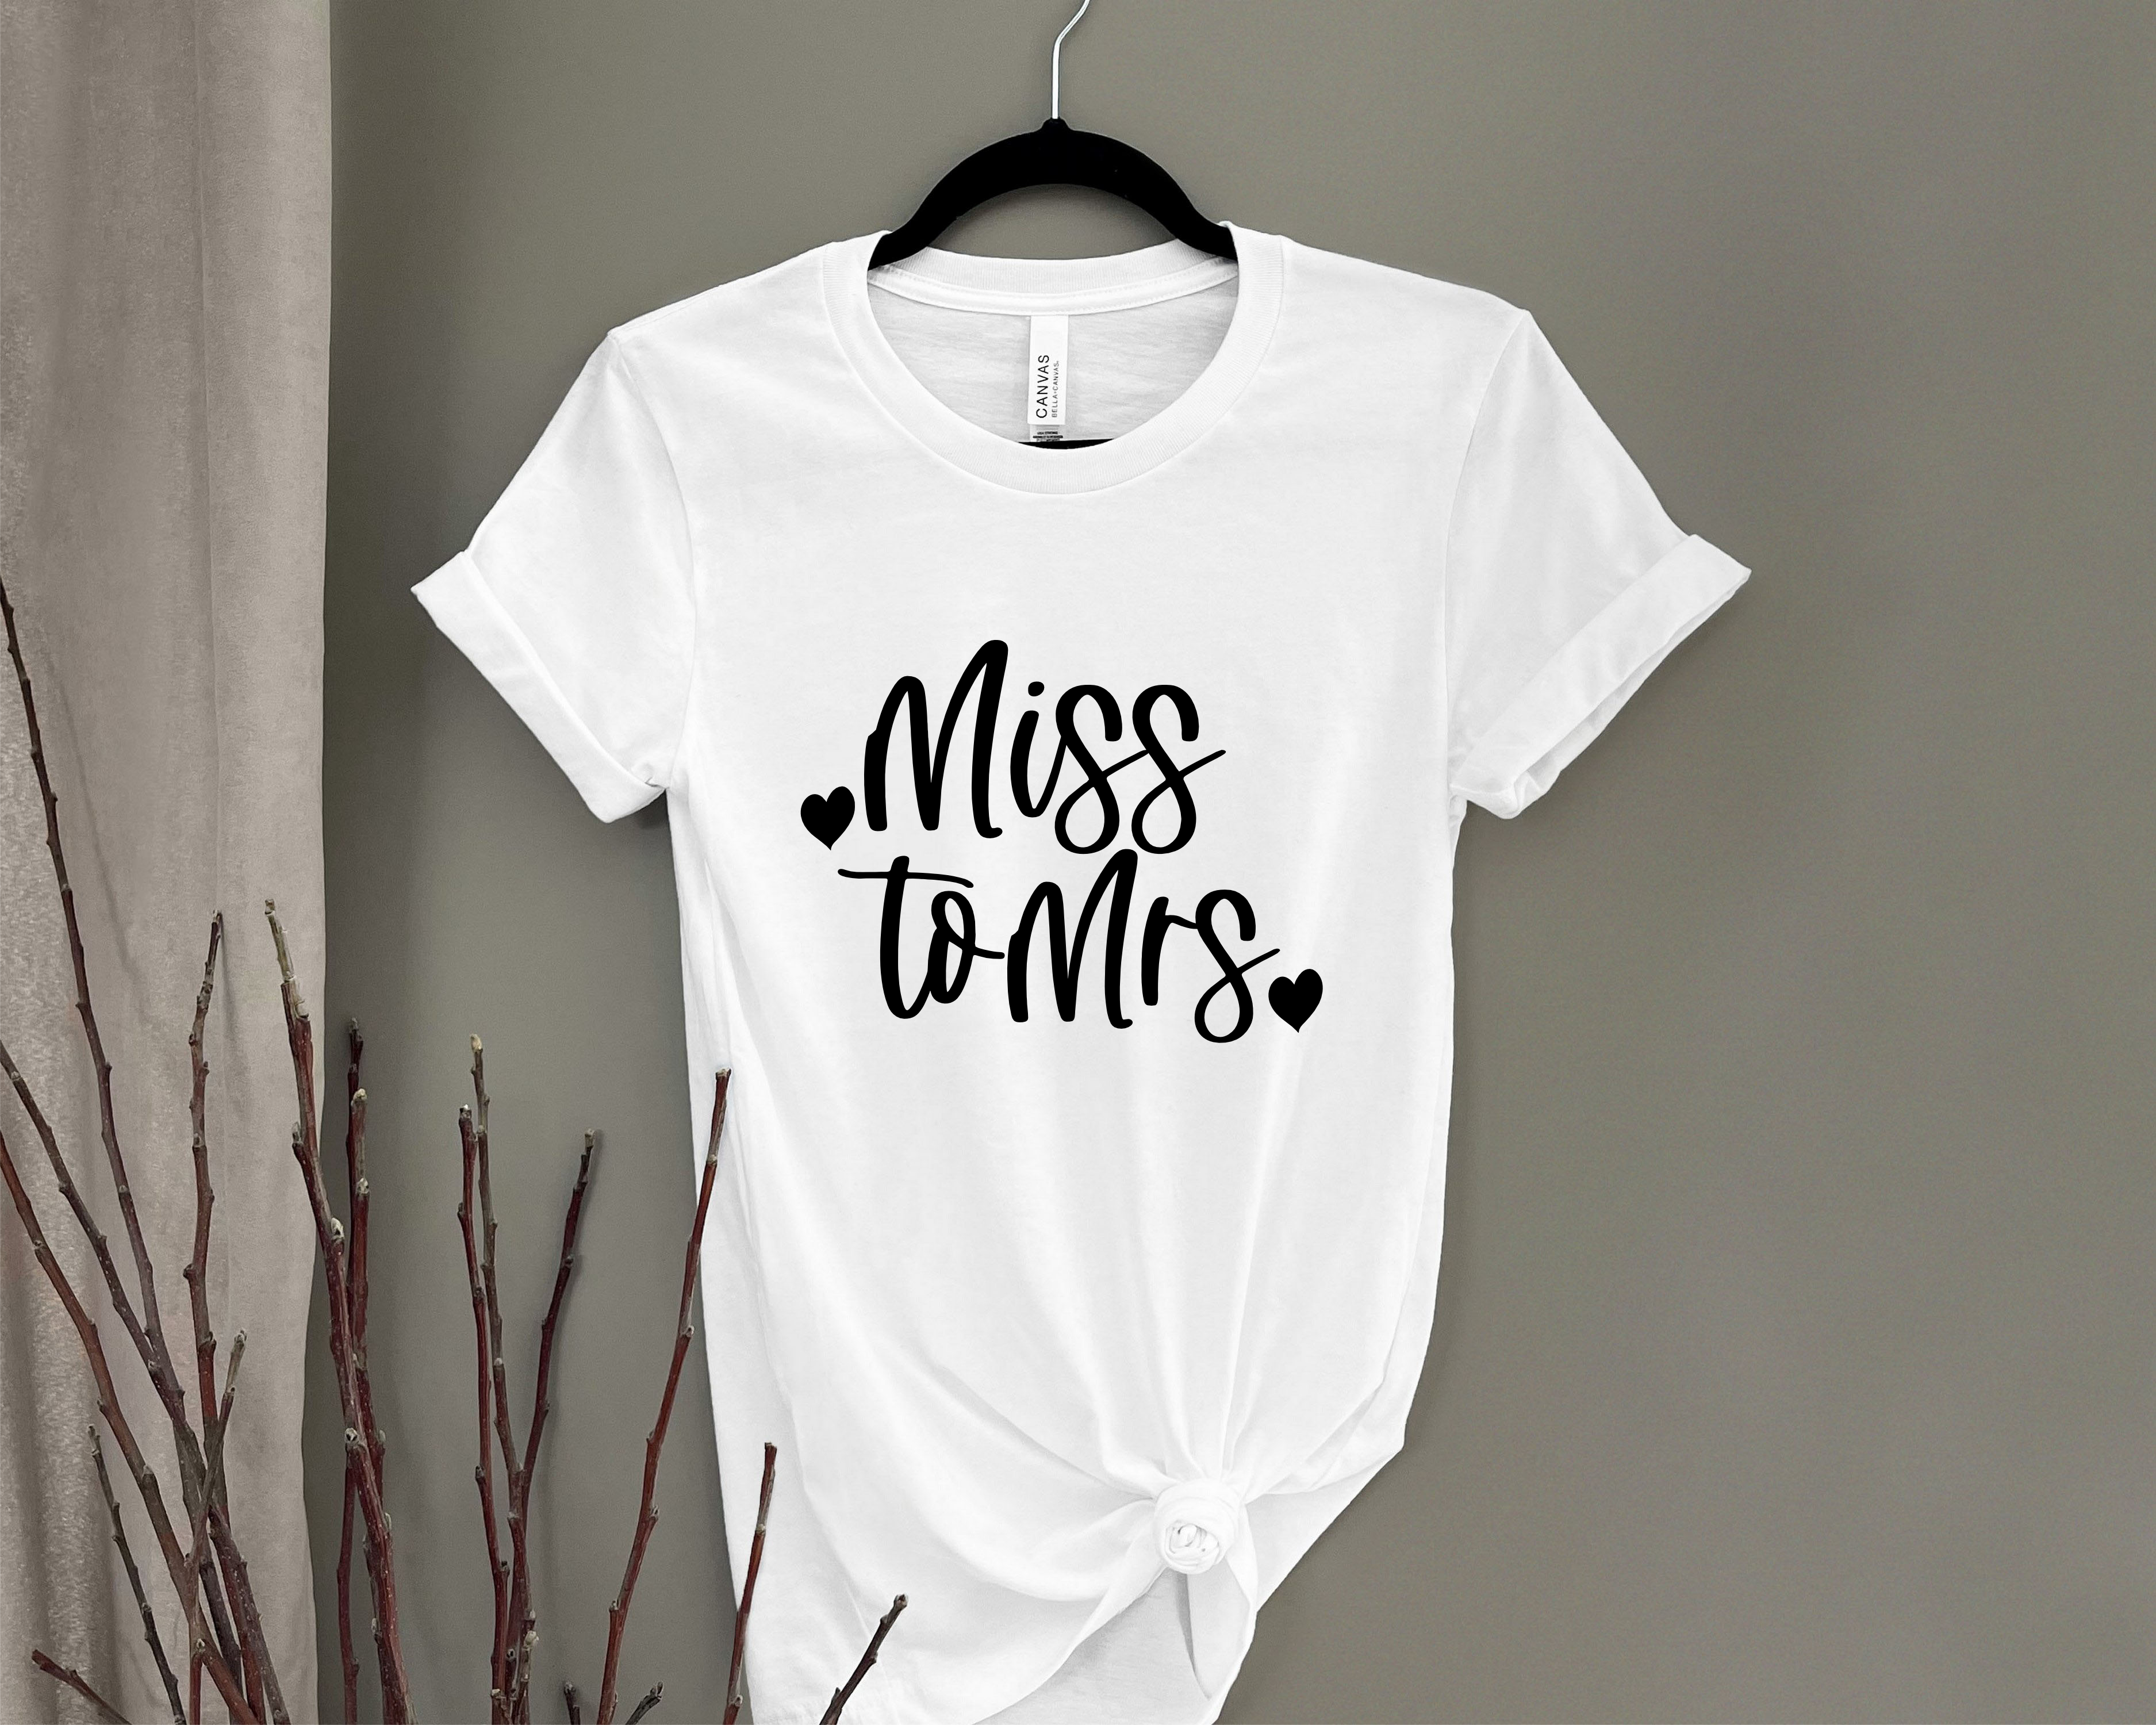 Unique Miss to Mrs Shirt - Commercially Printed Shirt - Fast Turn Around Time